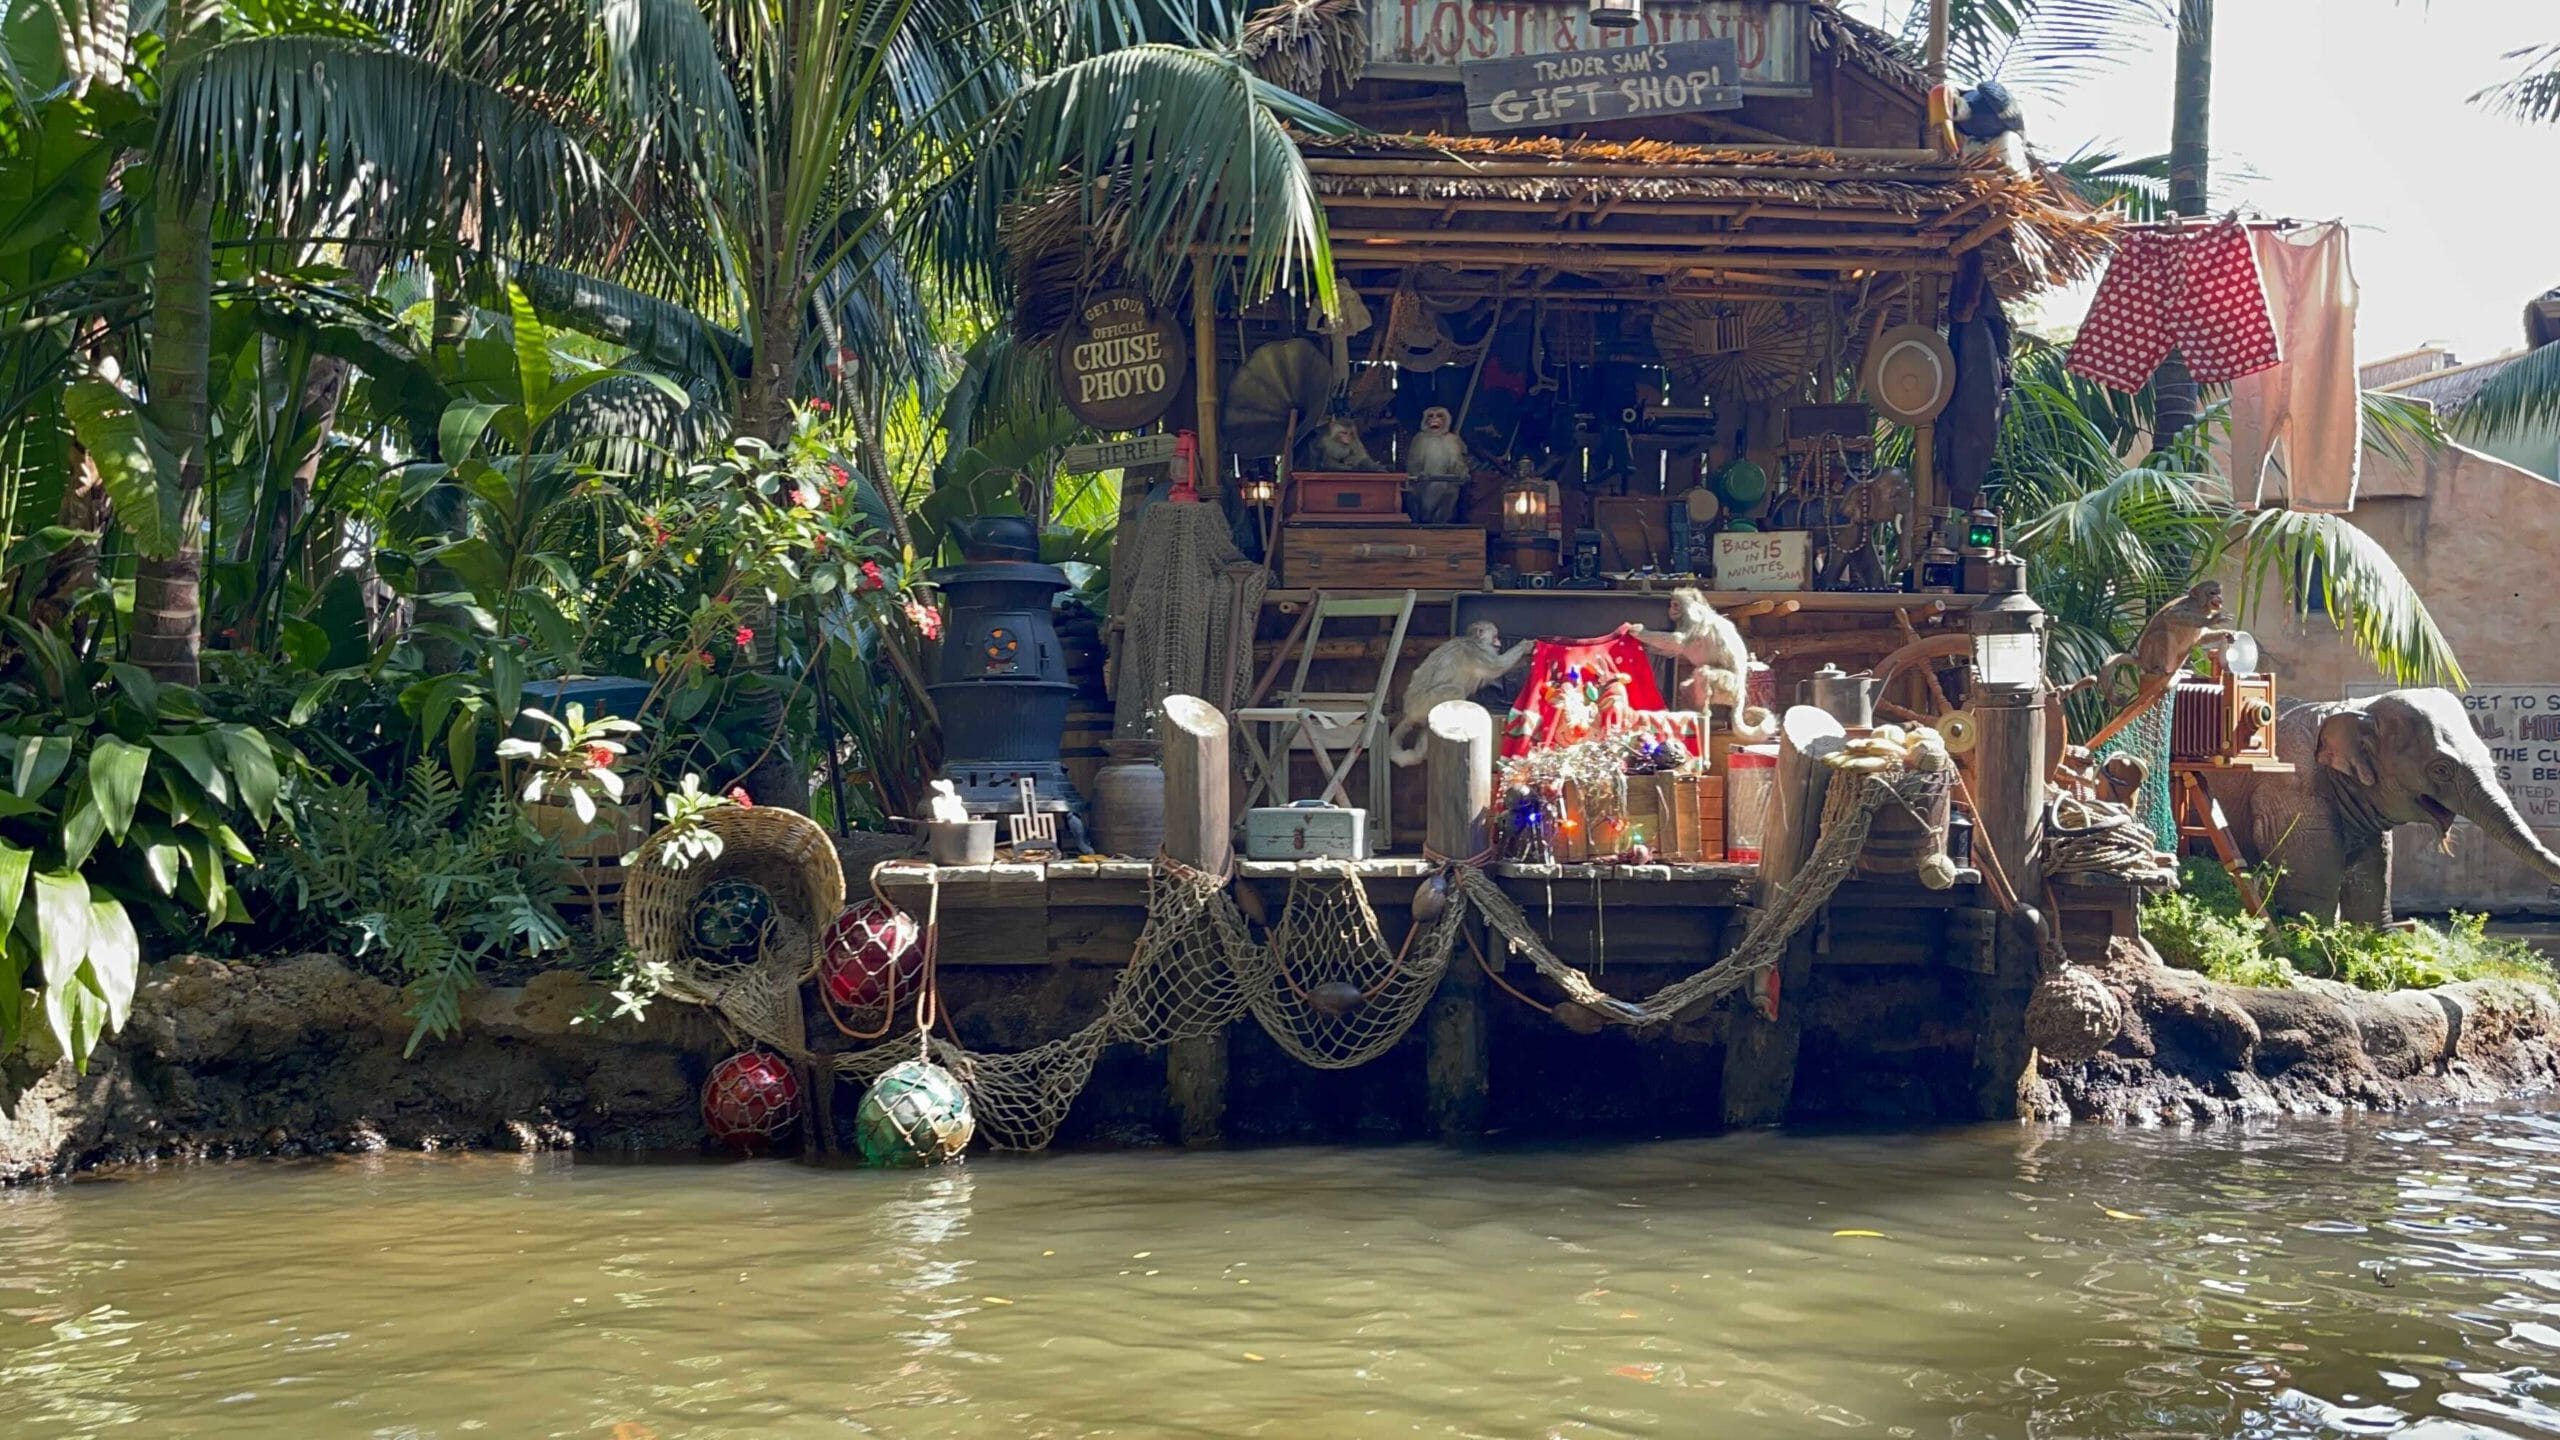 PHOTOS, VIDEO: Now-Completed NEW Jungle Cruise Attraction with Cultural Sen...